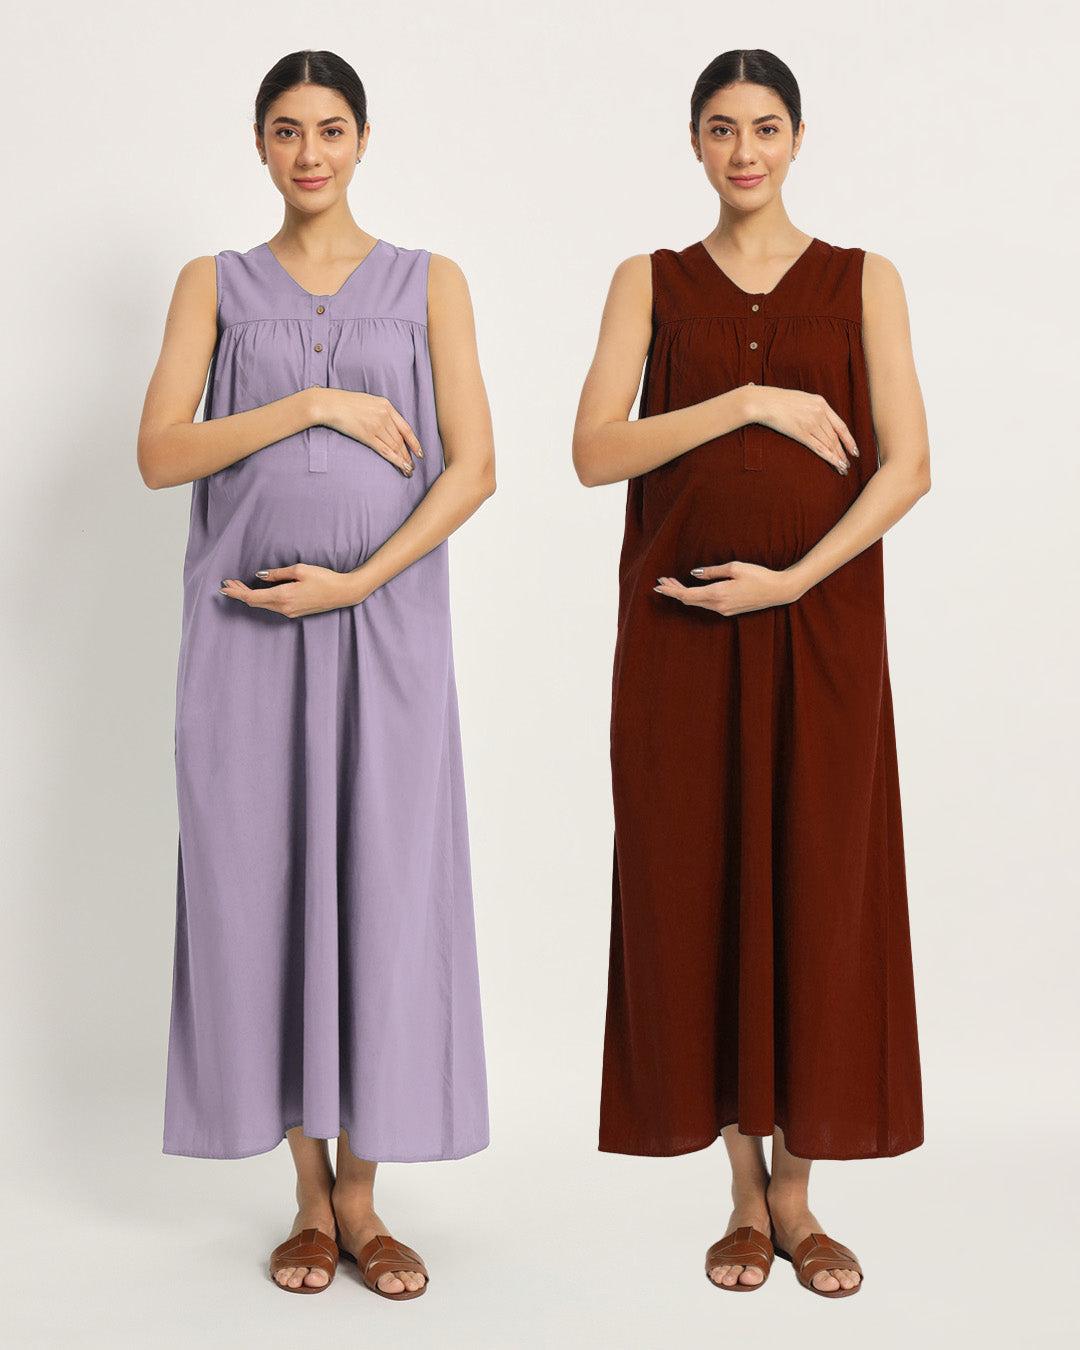 Combo: Lilac & Russet Red Mommylicious Maternity & Nursing Dress